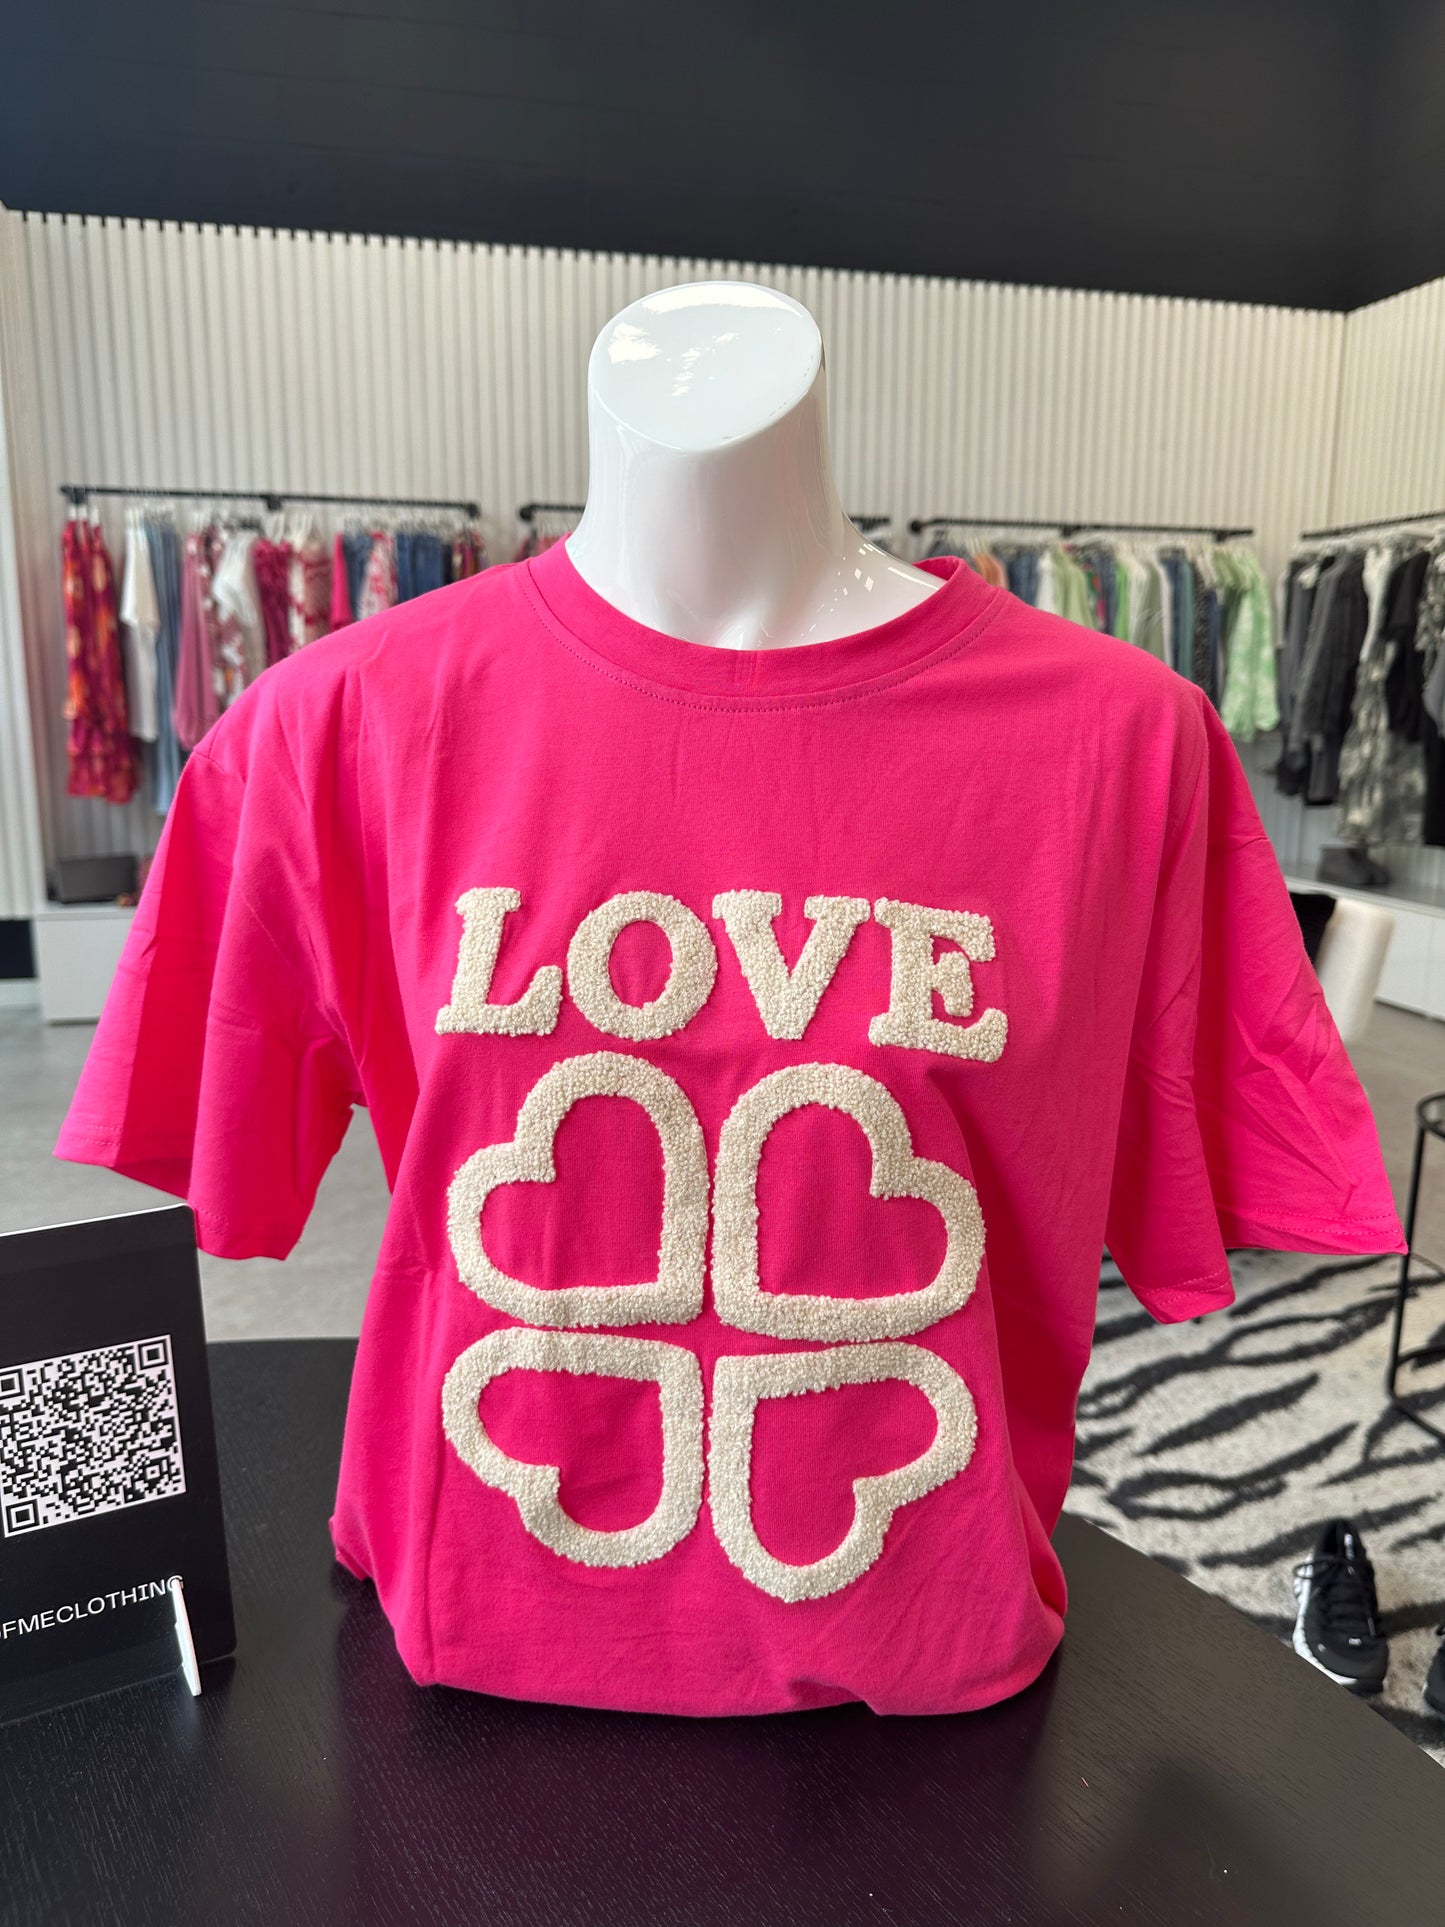 ‘LOVE’ one size t-shirt with towel detail